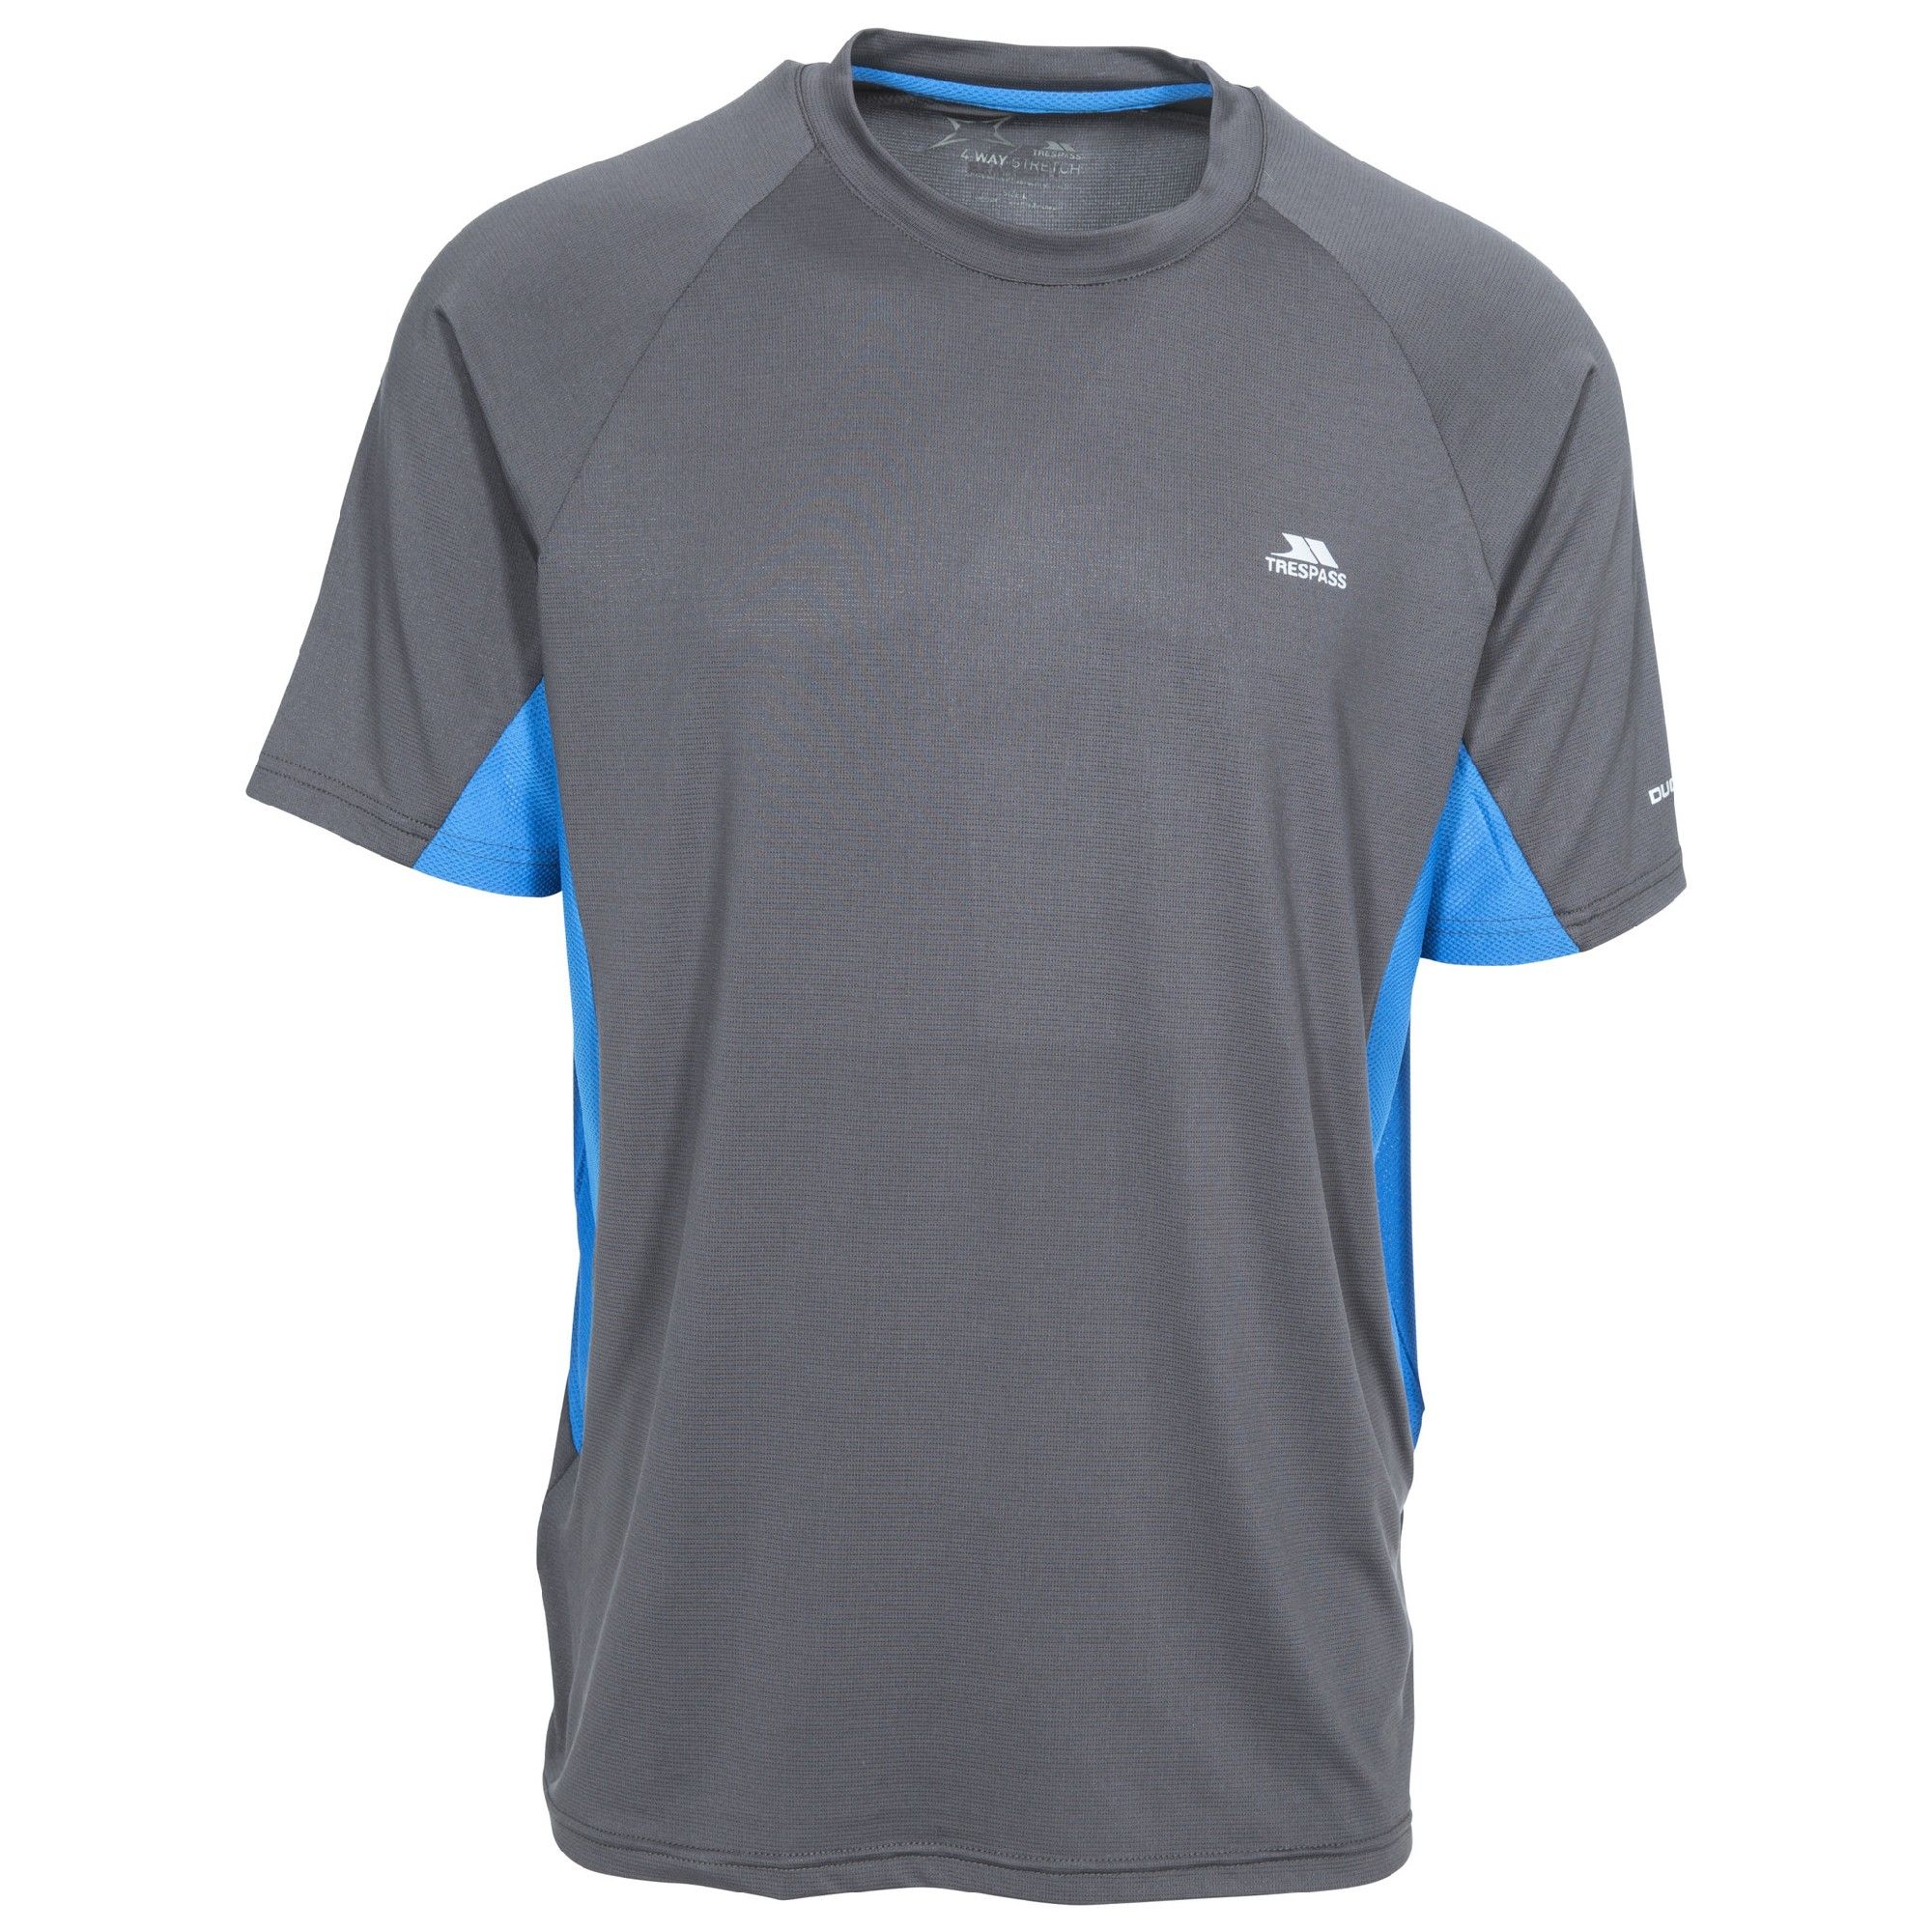 Short sleeve. Round neck. Contrast mesh panels. Reflective prints. 4 way stretch. Wicking. Quick dry. Main: 92% Polyester/8% Elastane, Mesh: 100% Polyester. Trespass Mens Chest Sizing (approx): S - 35-37in/89-94cm, M - 38-40in/96.5-101.5cm, L - 41-43in/104-109cm, XL - 44-46in/111.5-117cm, XXL - 46-48in/117-122cm, 3XL - 48-50in/122-127cm.